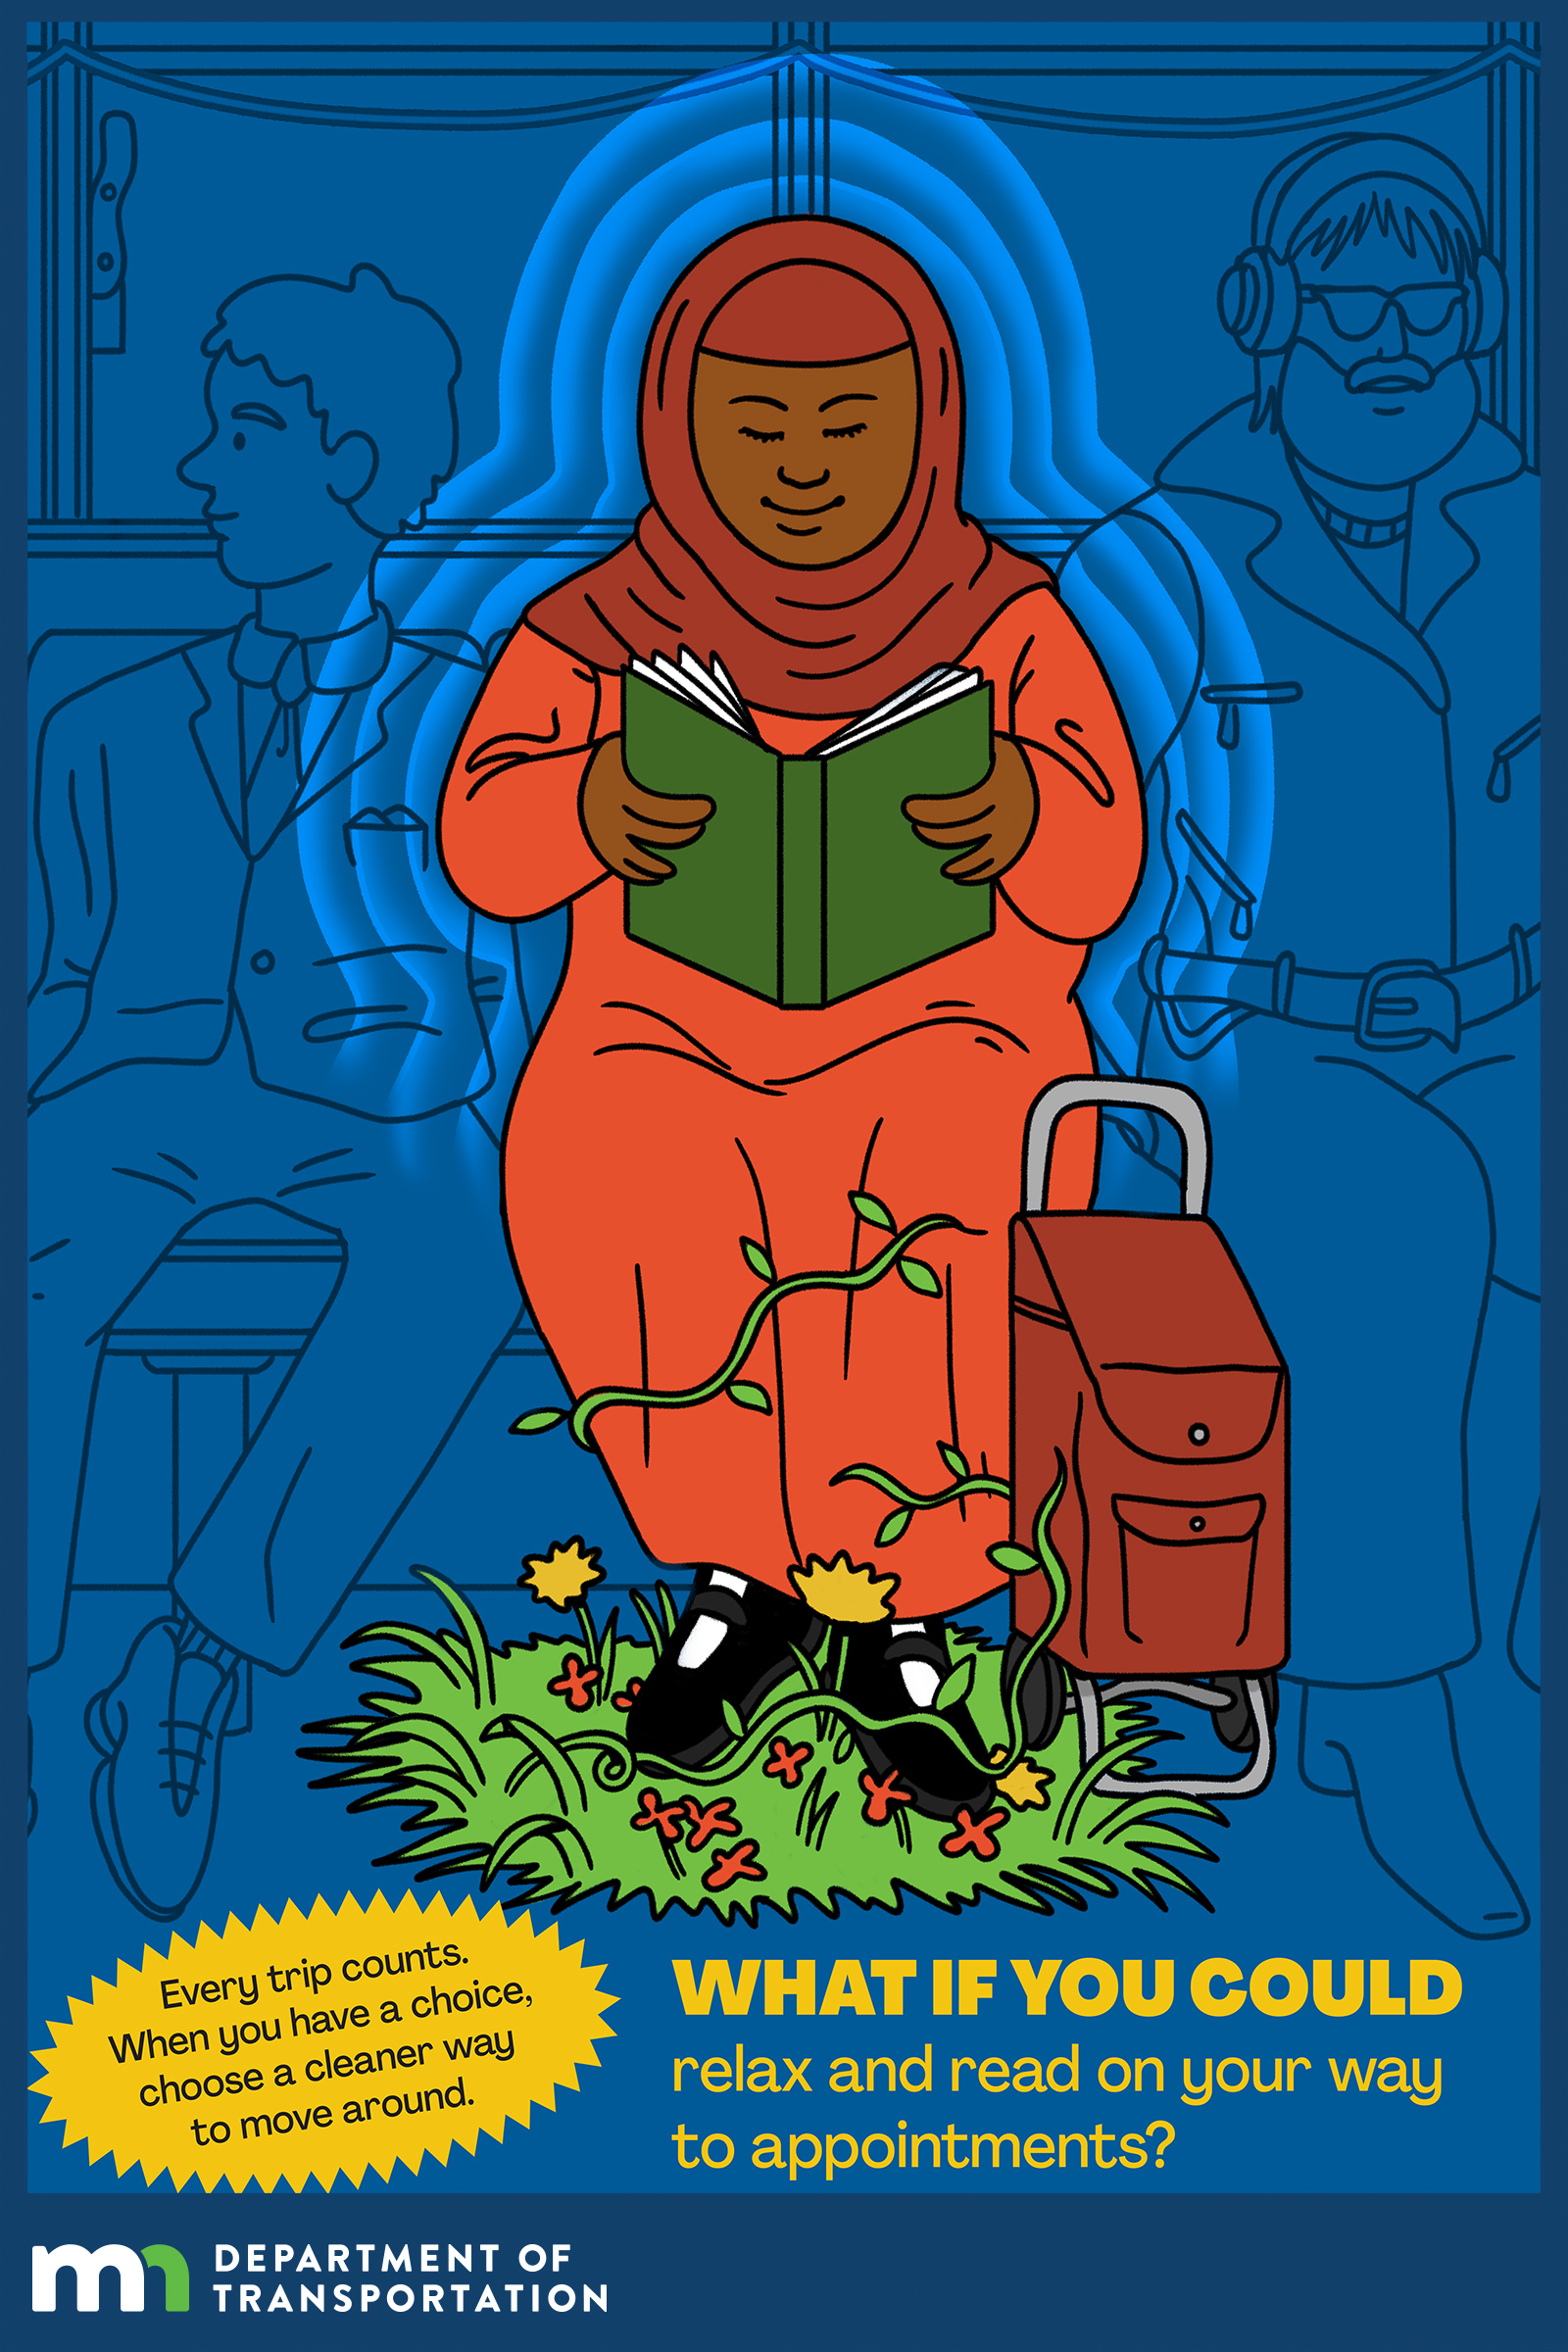 Illustration by graphic designer Noah Lawrence-Holder, as part of the What if You Could poster campaign. Image is of a woman sitting on a bus reading a book with the text What if you could relax and read on the way to your appointments?